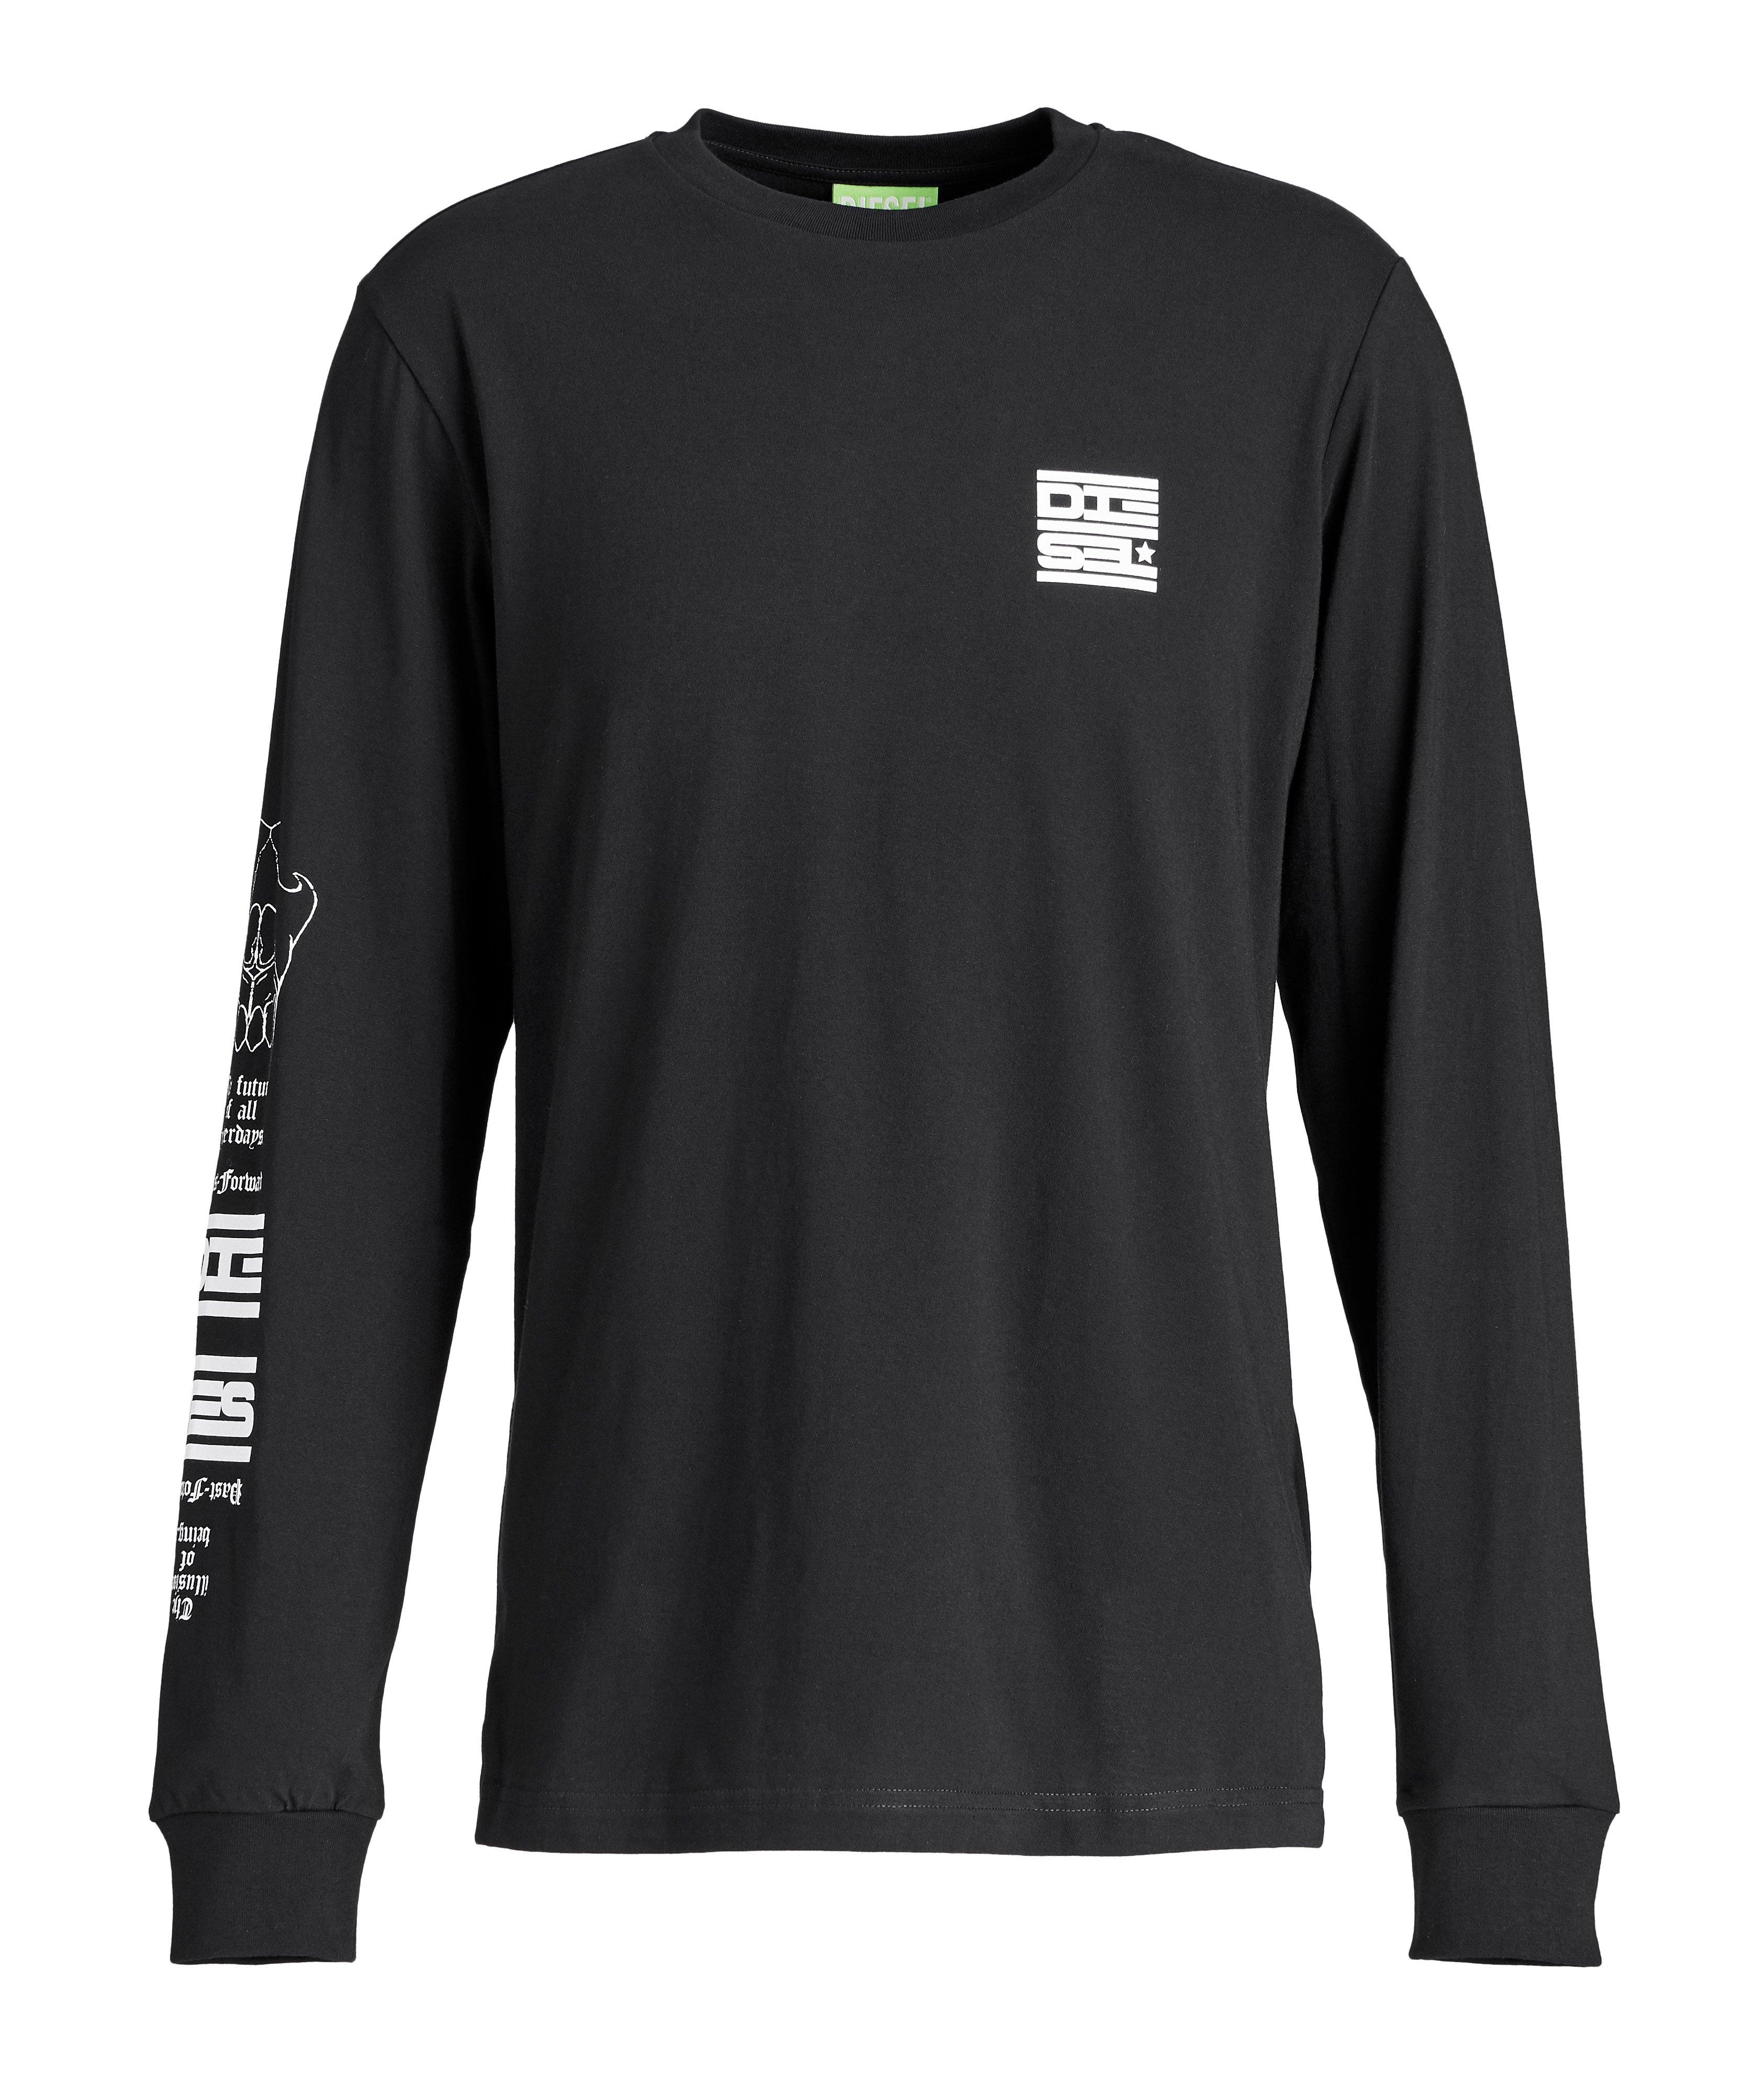 Long-Sleeve Graphic T-Shirt image 0